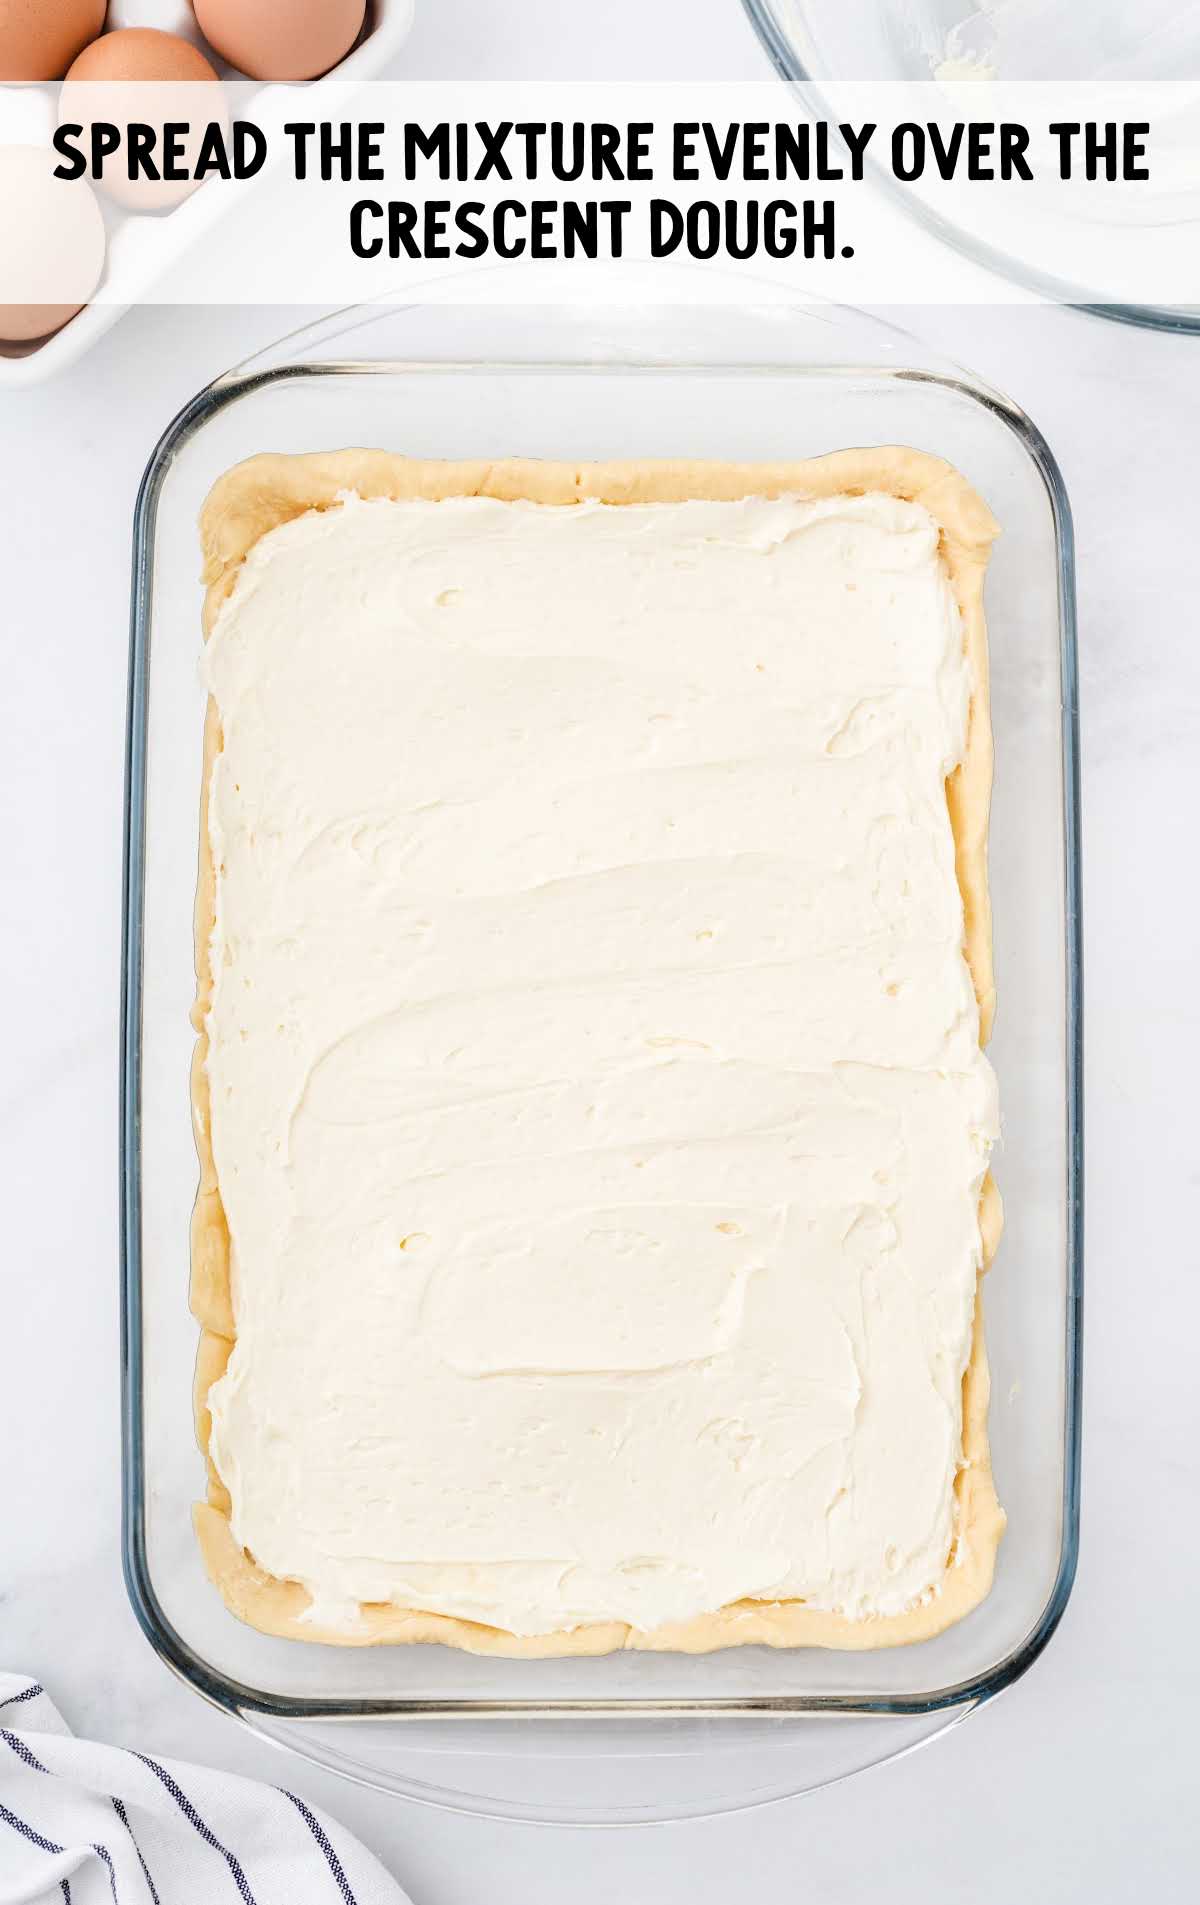 cream cheese mixture spread over the dough in a baking dish